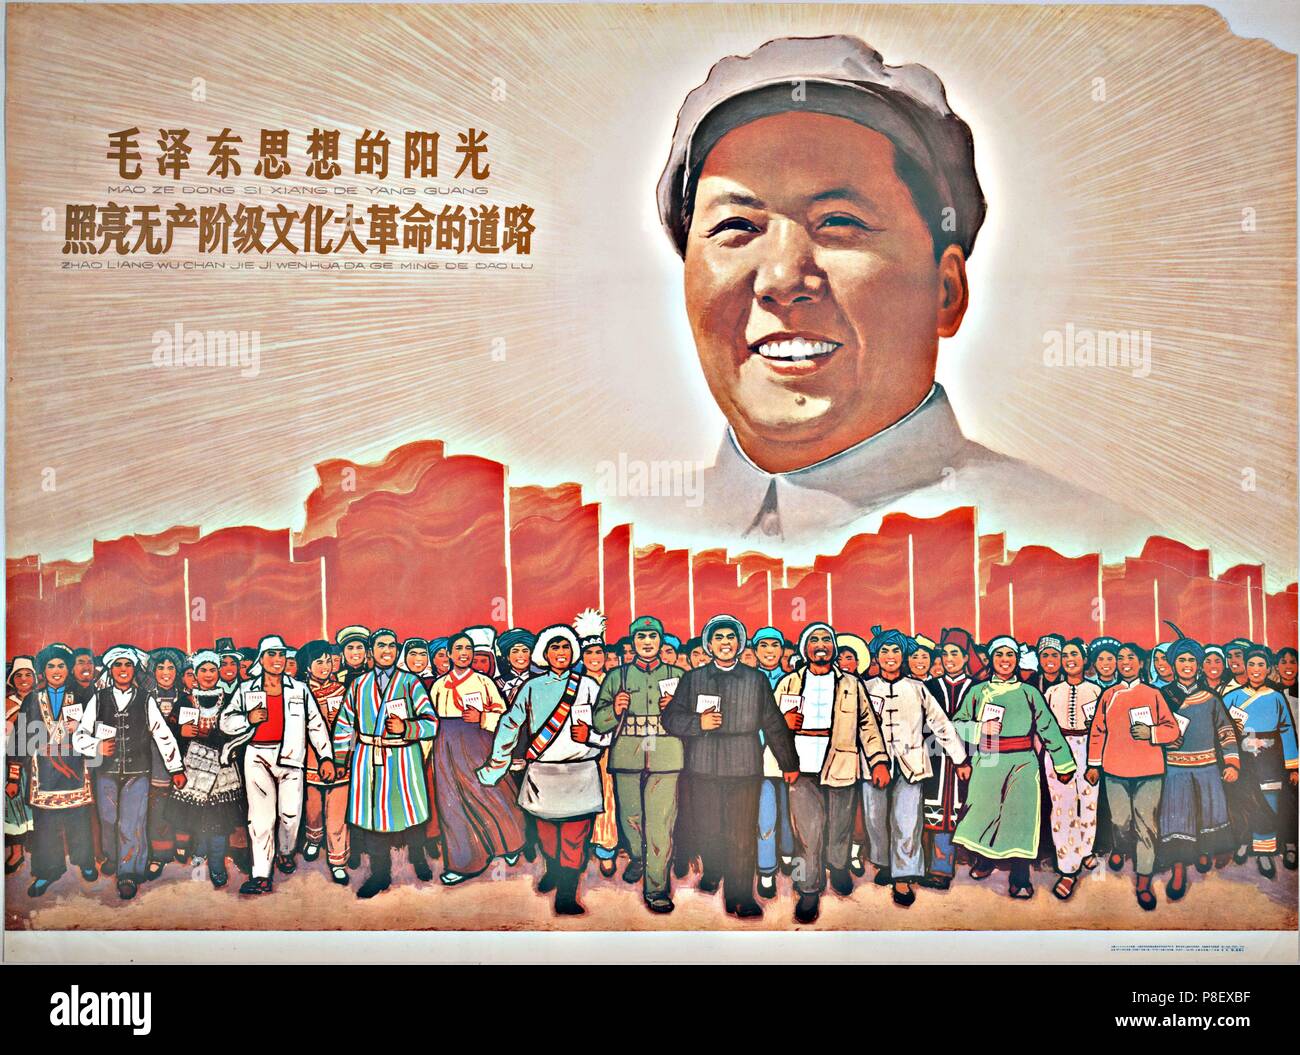 The Sunshine of Mao Zedong Thought Illuminates the Path of the Great Proletarian Cultural Revolution. Museum: PRIVATE COLLECTION. Stock Photo